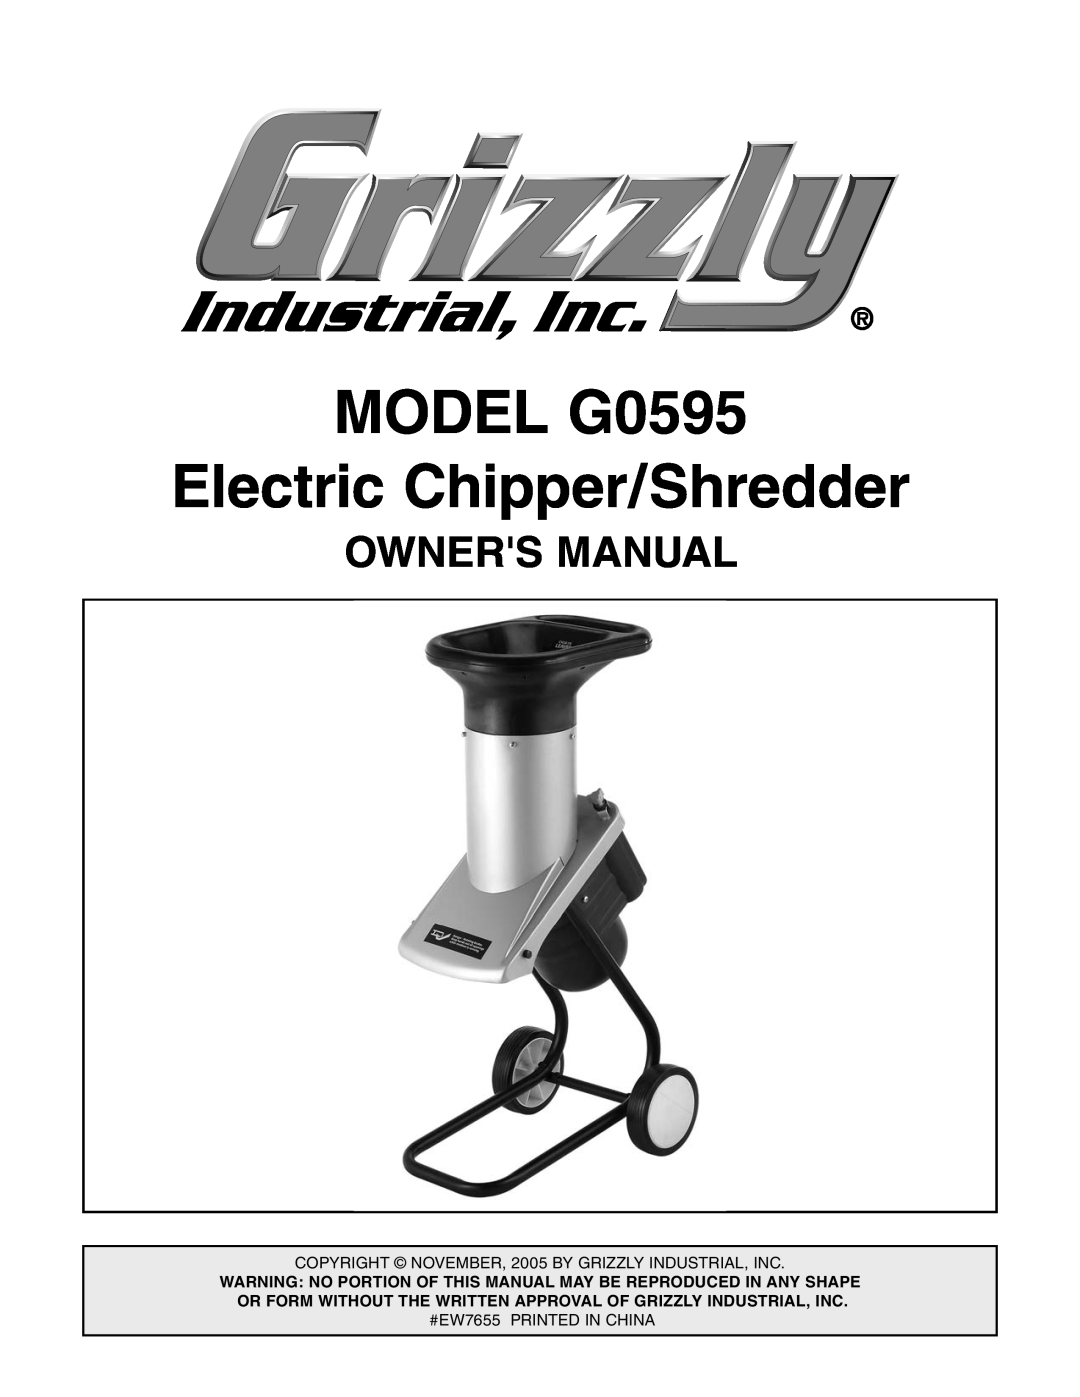 Grizzly G0595 manual 7.%2g32-!.5, $%,,, LECTRIC #HIPPER3HREDDER 